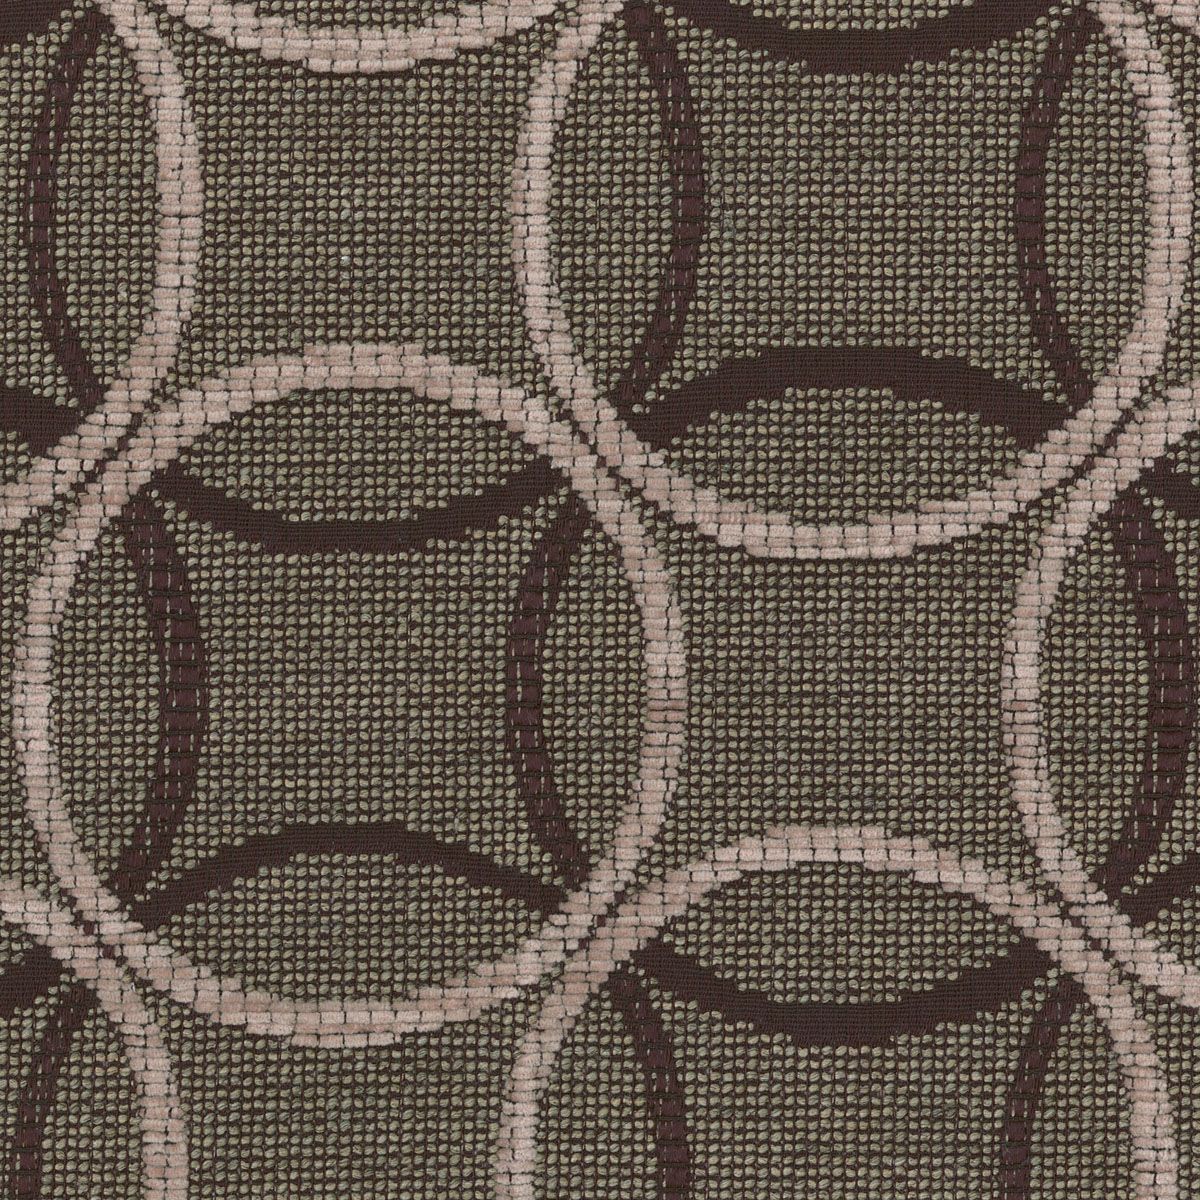 Klosters fabric in chocolate color - pattern number RH 00033872 - by Scalamandre in the Old World Weavers collection